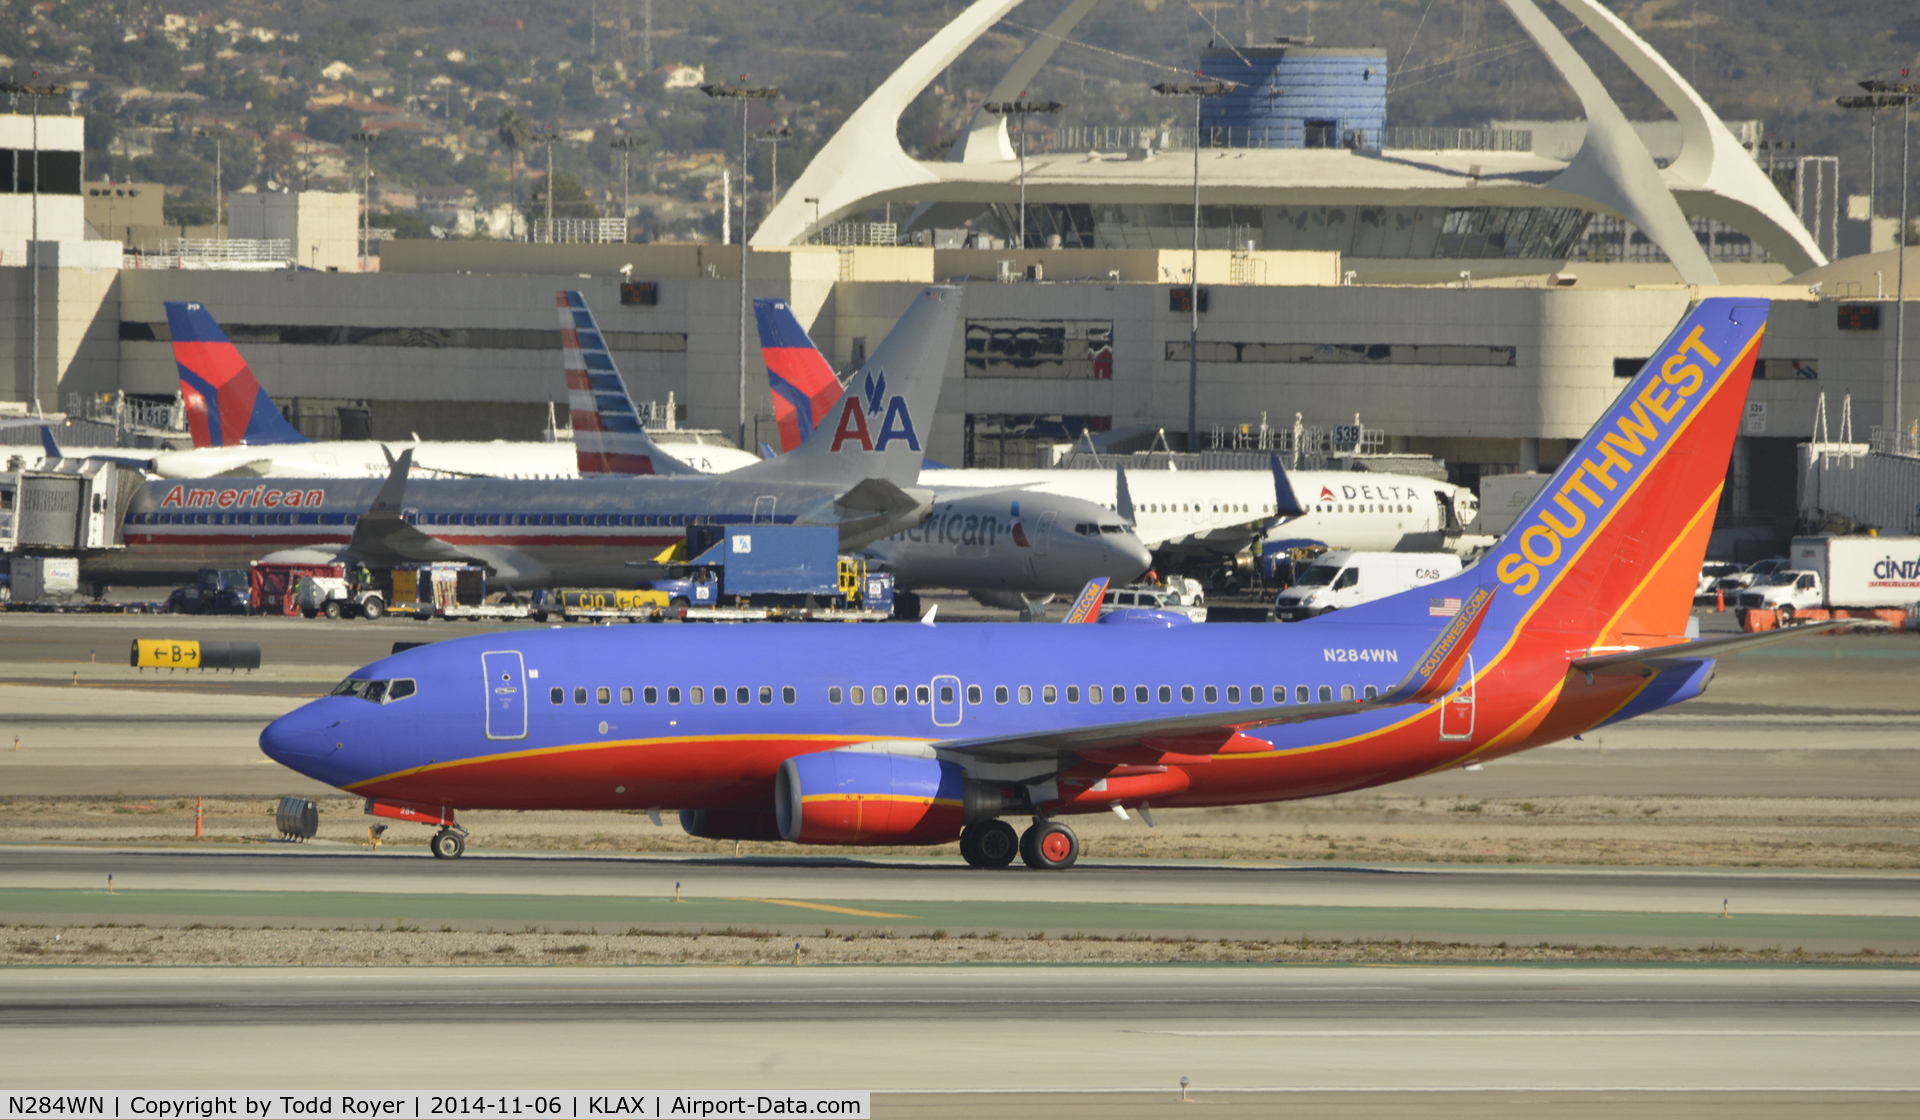 N284WN, 2007 Boeing 737-7H4 C/N 32535, Taxiing to gate after landing on 25R at LAX